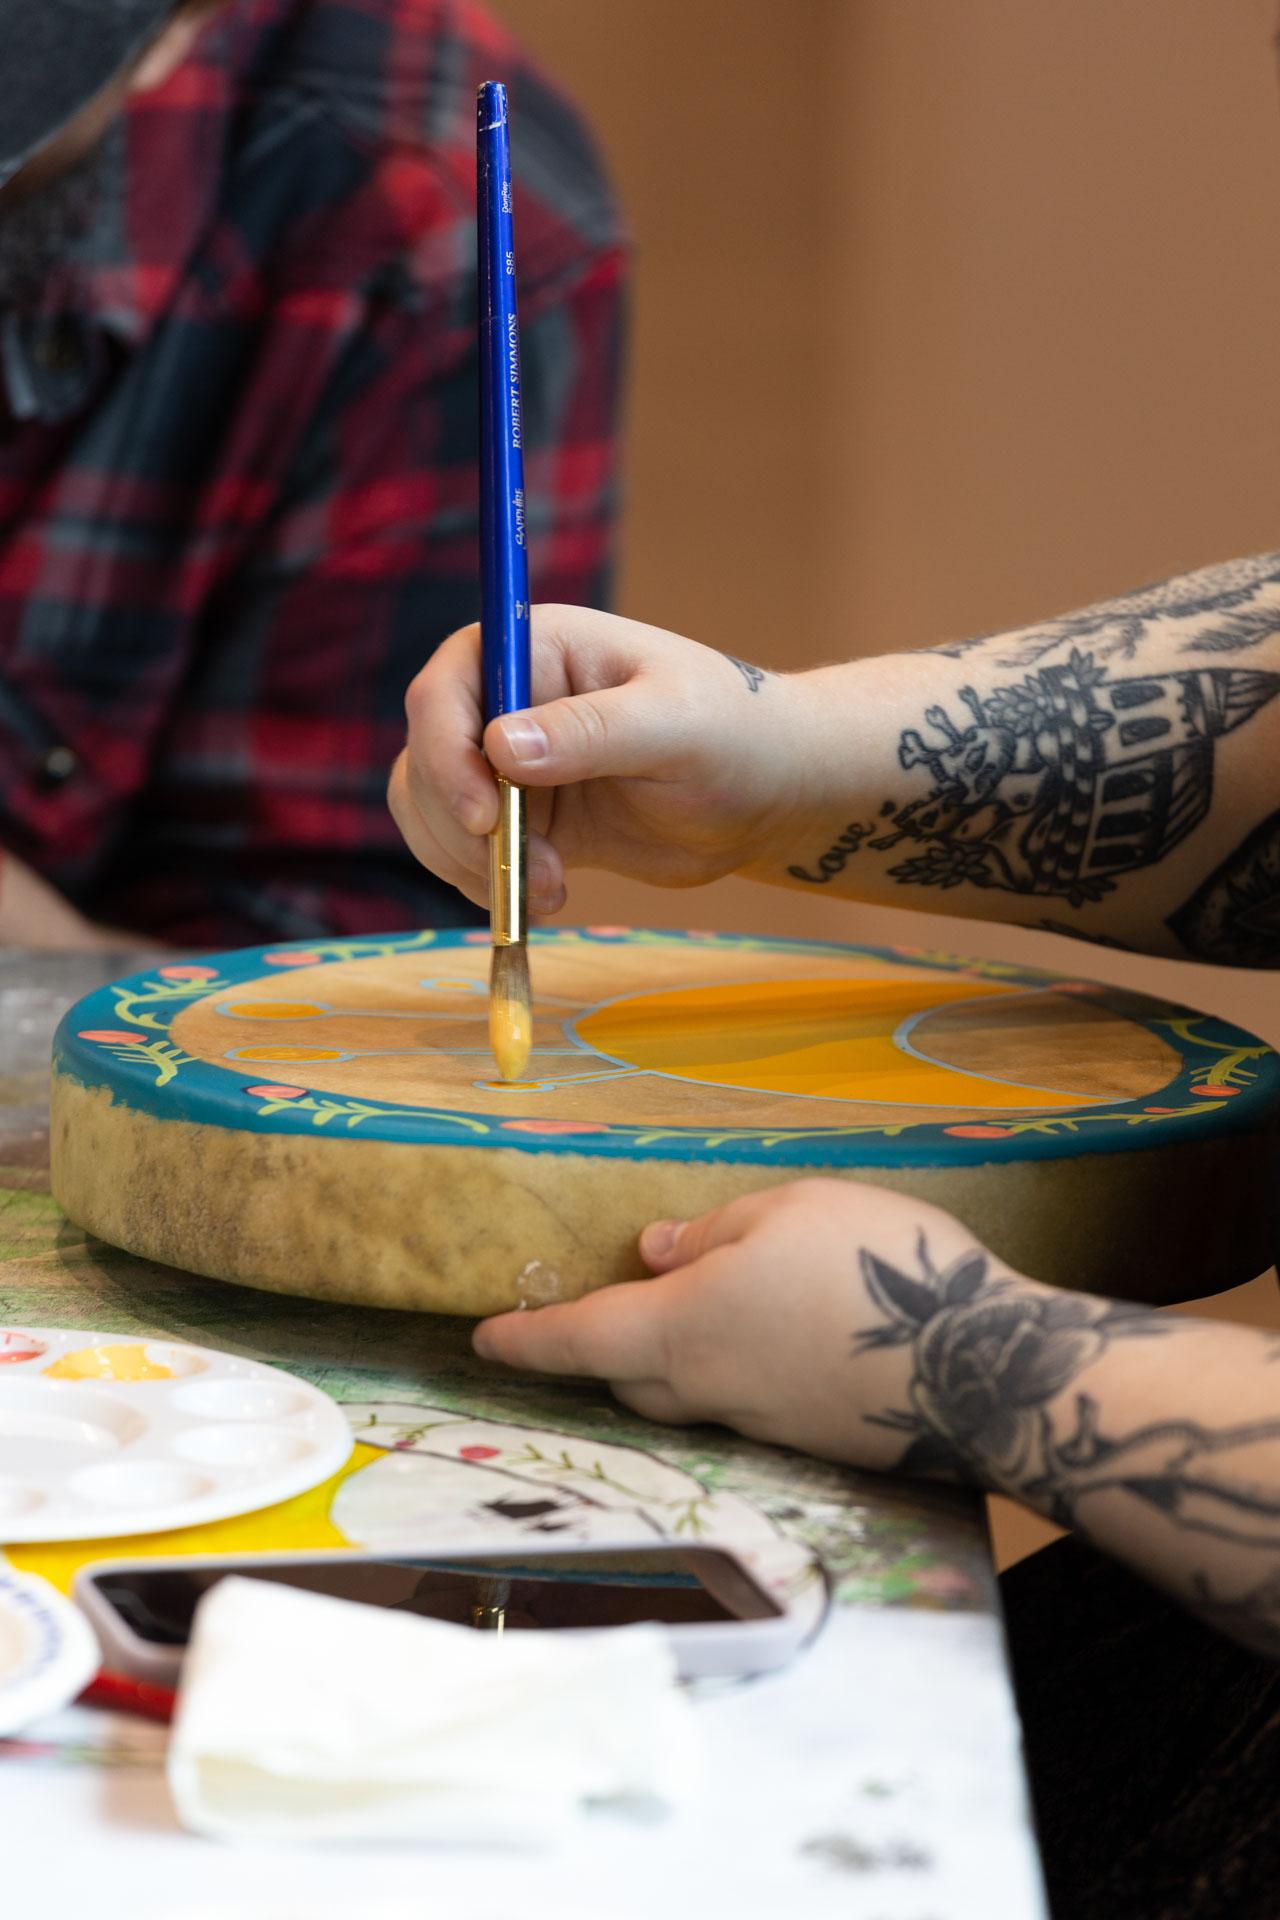 photograph of an artist holding a rawhide drum resting on a table, while brushing a paintbrush with yellow paint onto its surface